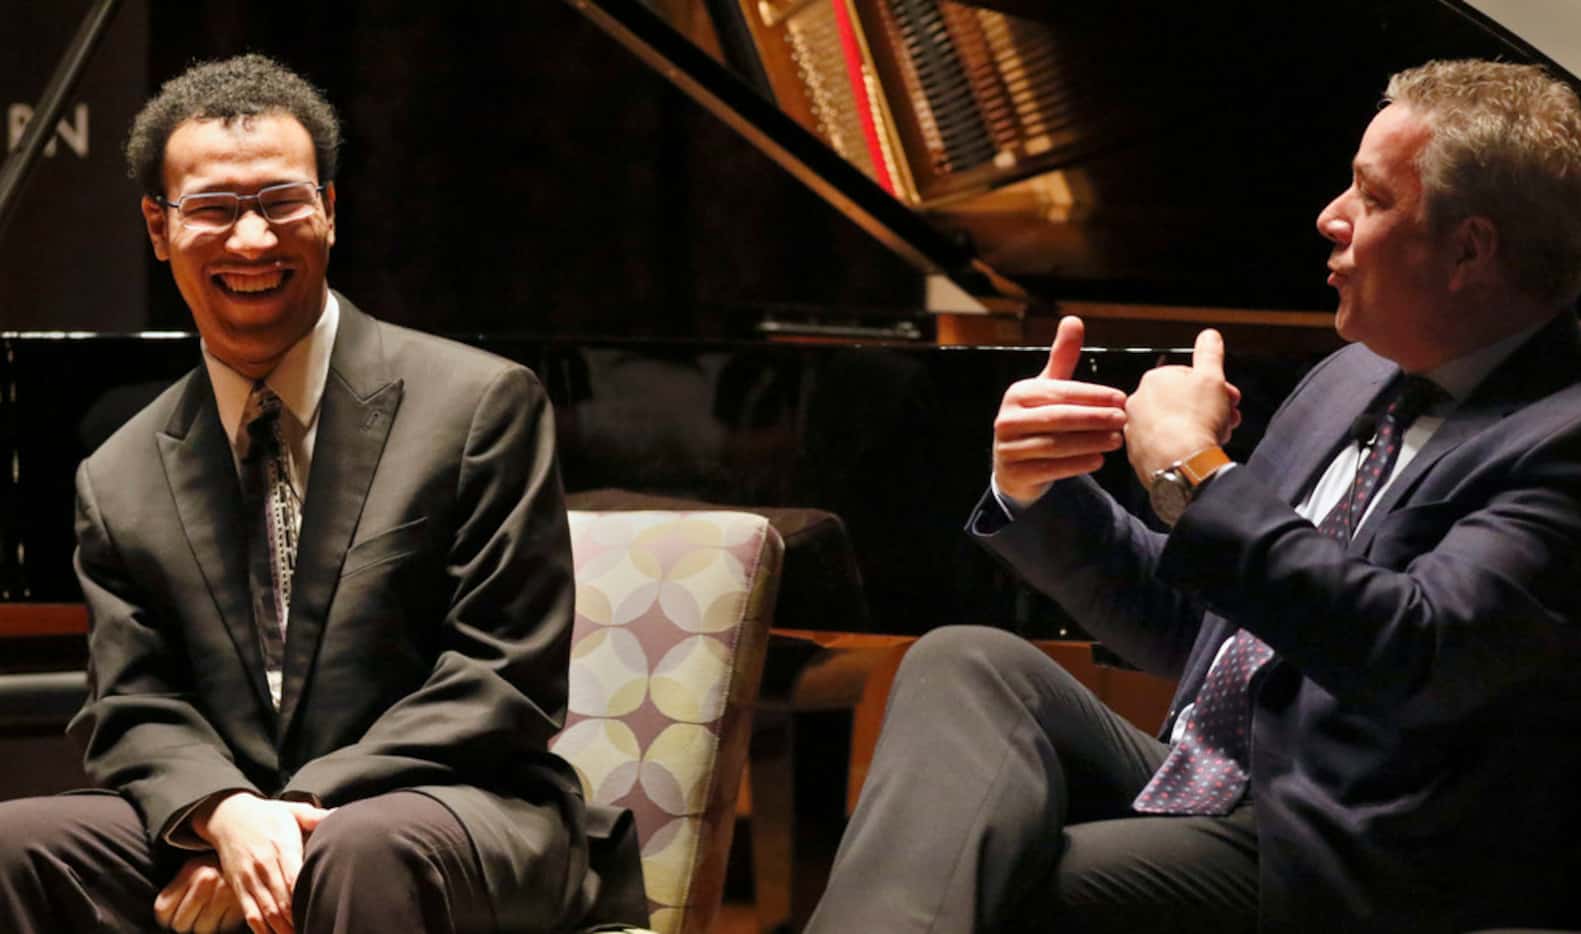 Cliburn pianist Clayton Stephenson (left) and Cliburn CEO Jacques Marquis speak during the...